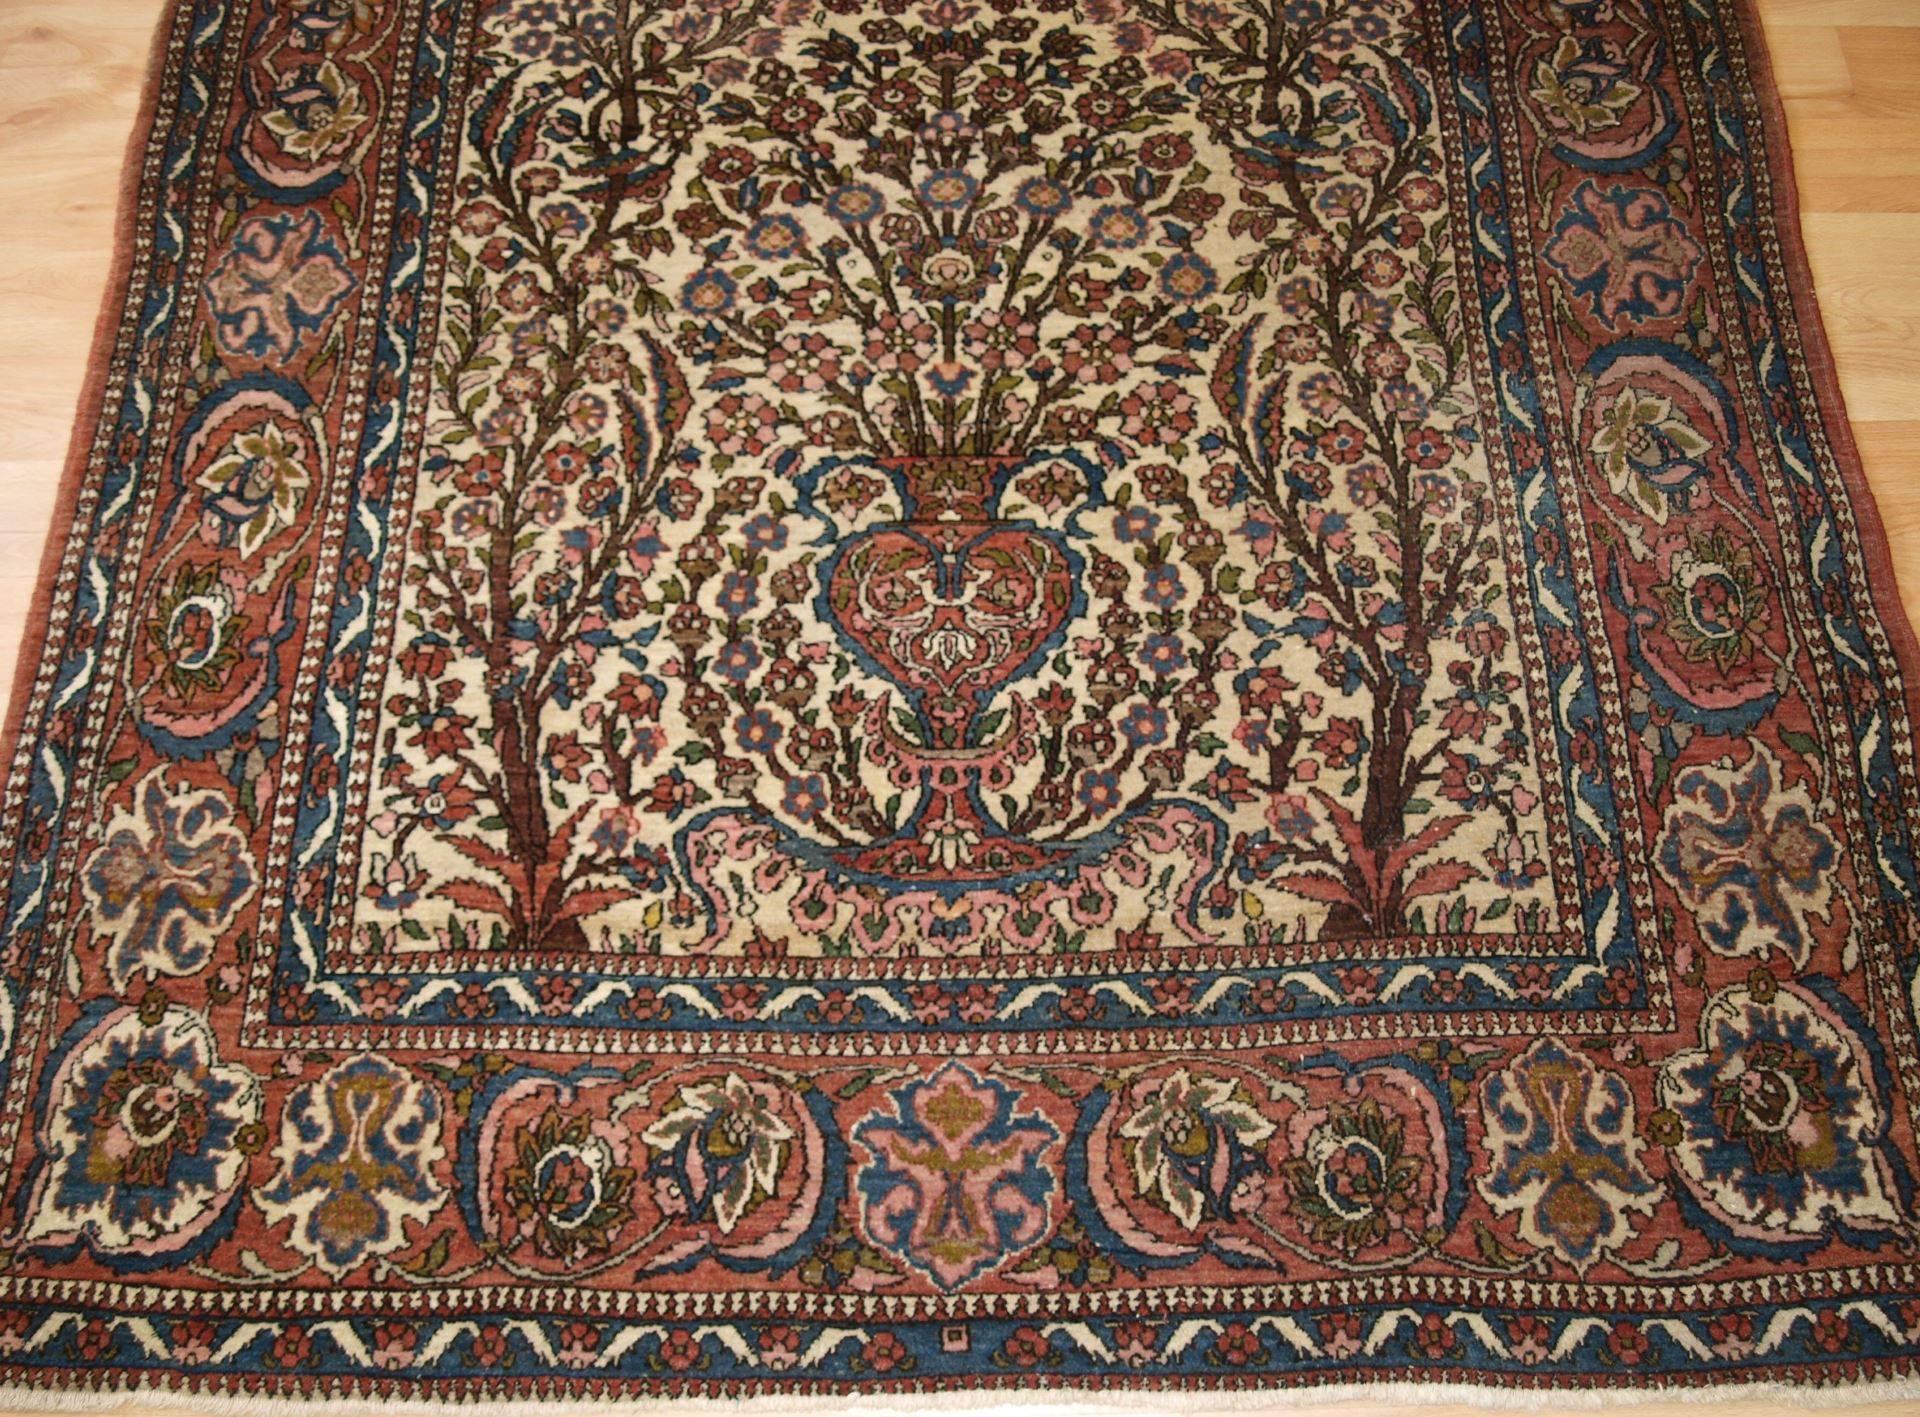 Isfahan Prayer Rug with a Very Traditional Floral Vase Design, circa 1900 For Sale 4